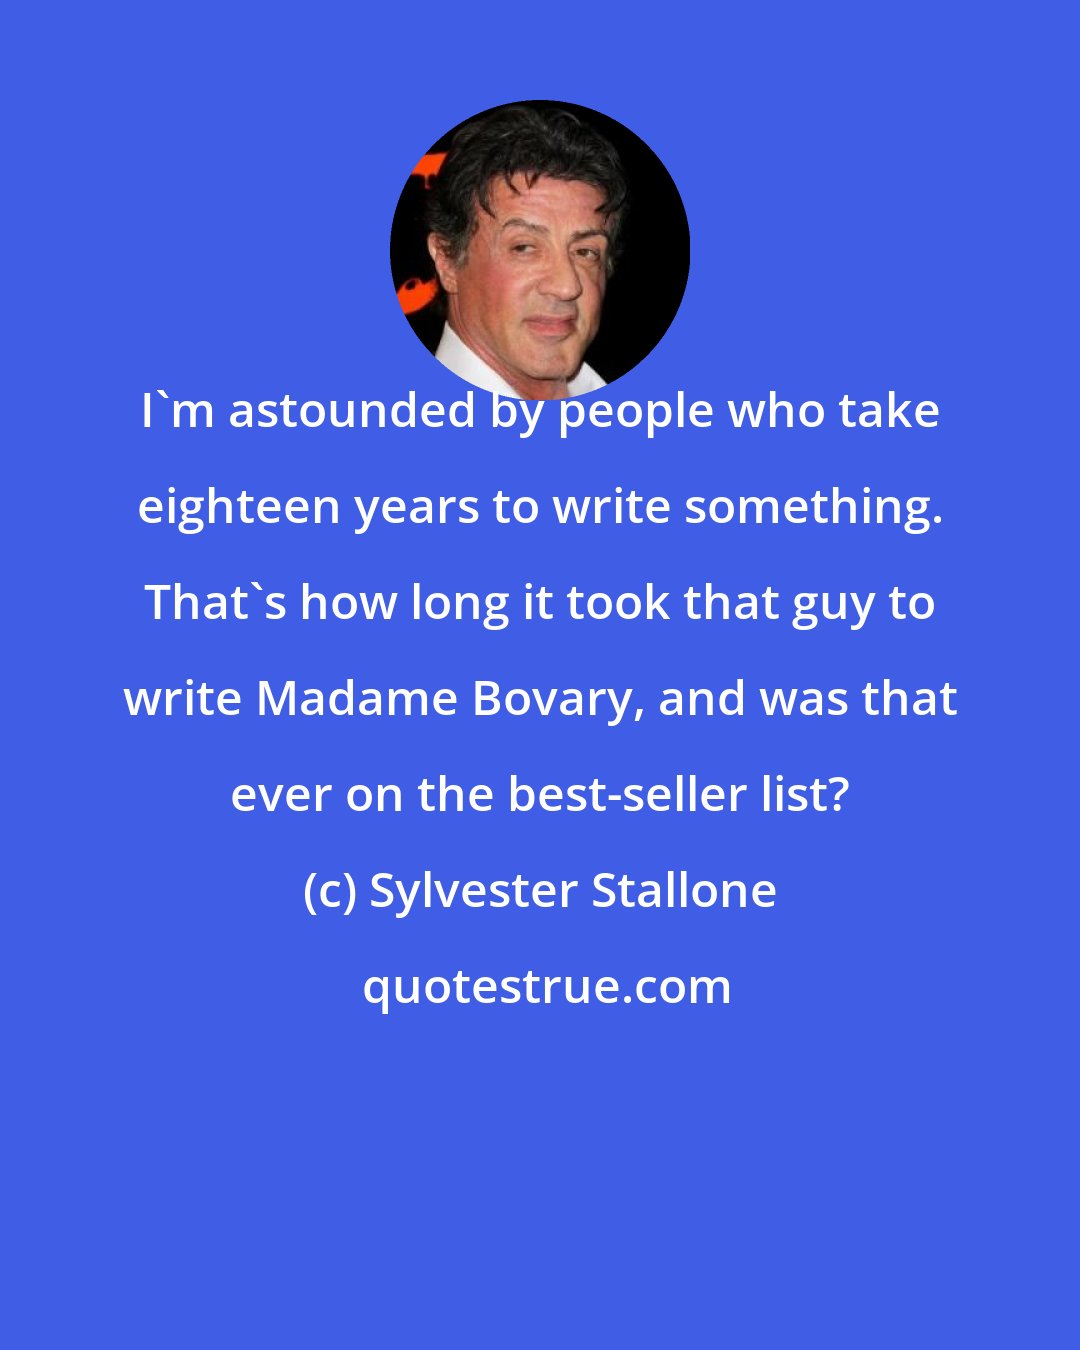 Sylvester Stallone: I'm astounded by people who take eighteen years to write something. That's how long it took that guy to write Madame Bovary, and was that ever on the best-seller list?